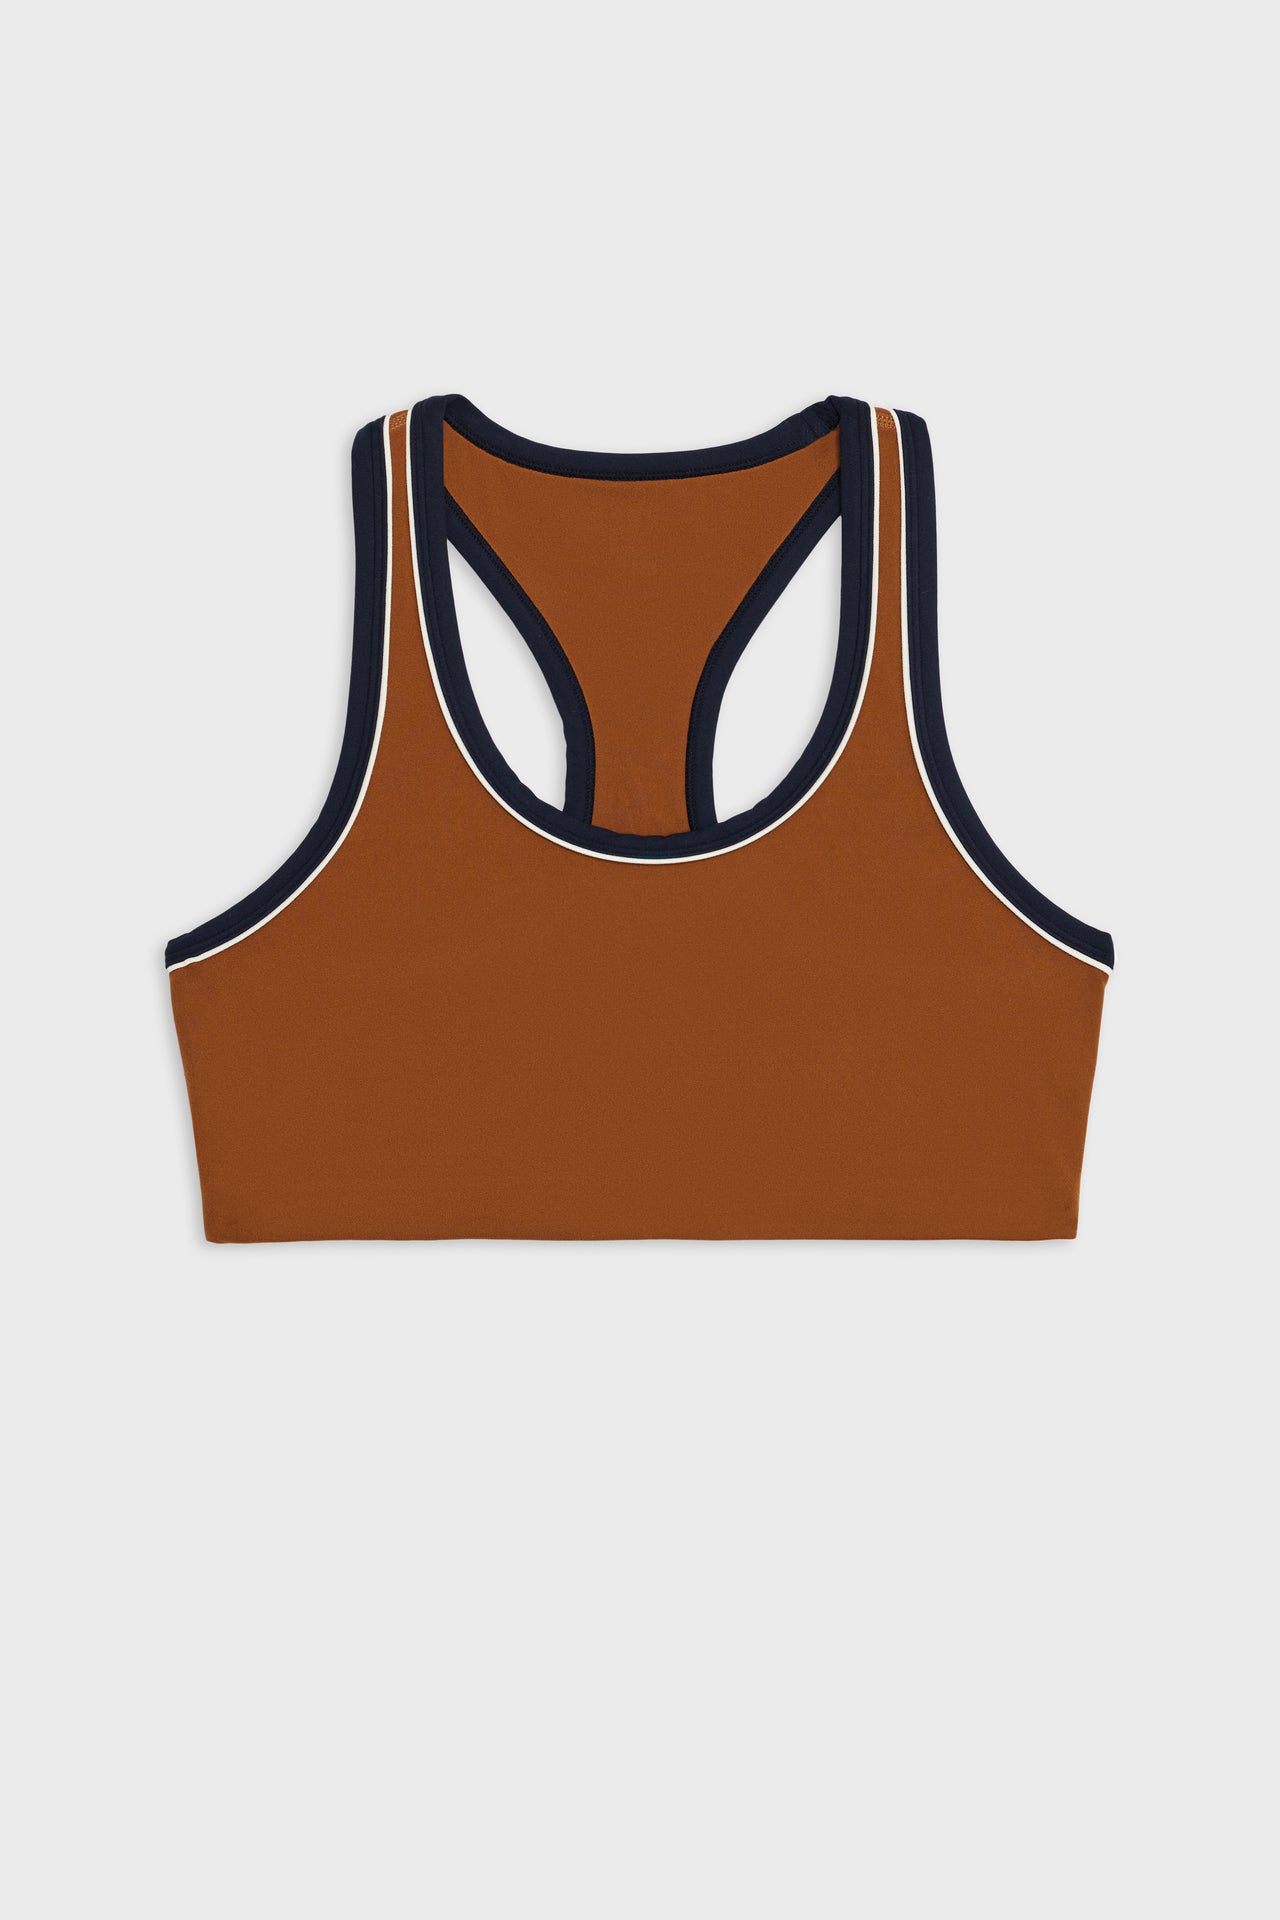 Front flat view of dark orange bra with white and dark blue border arm and neckline and racerback